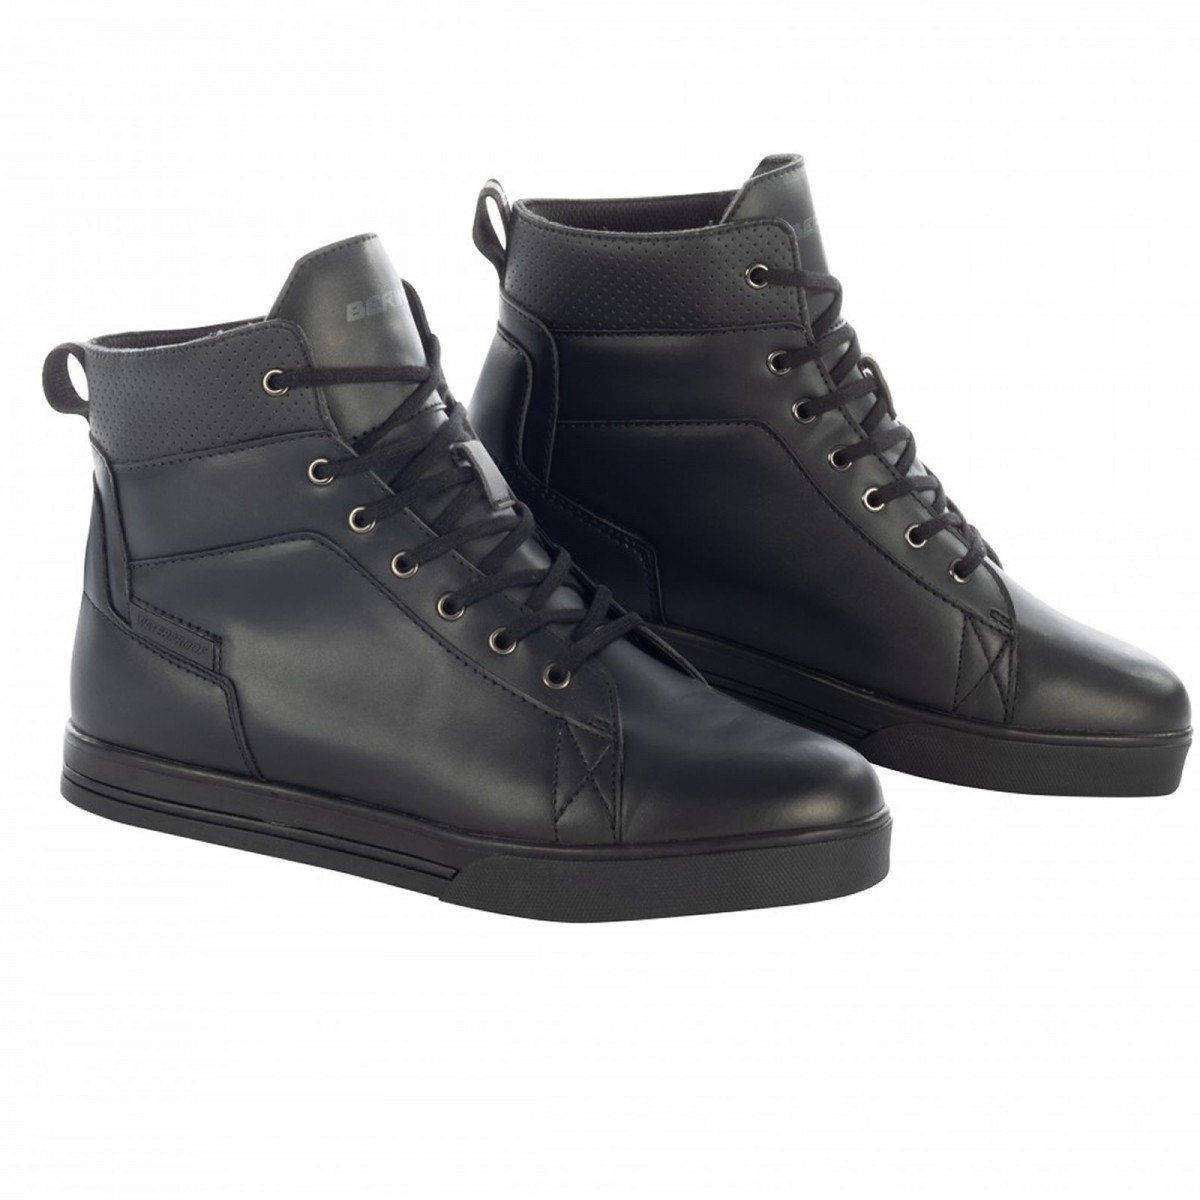 Image of Bering Indy Noir Chaussures Taille 41